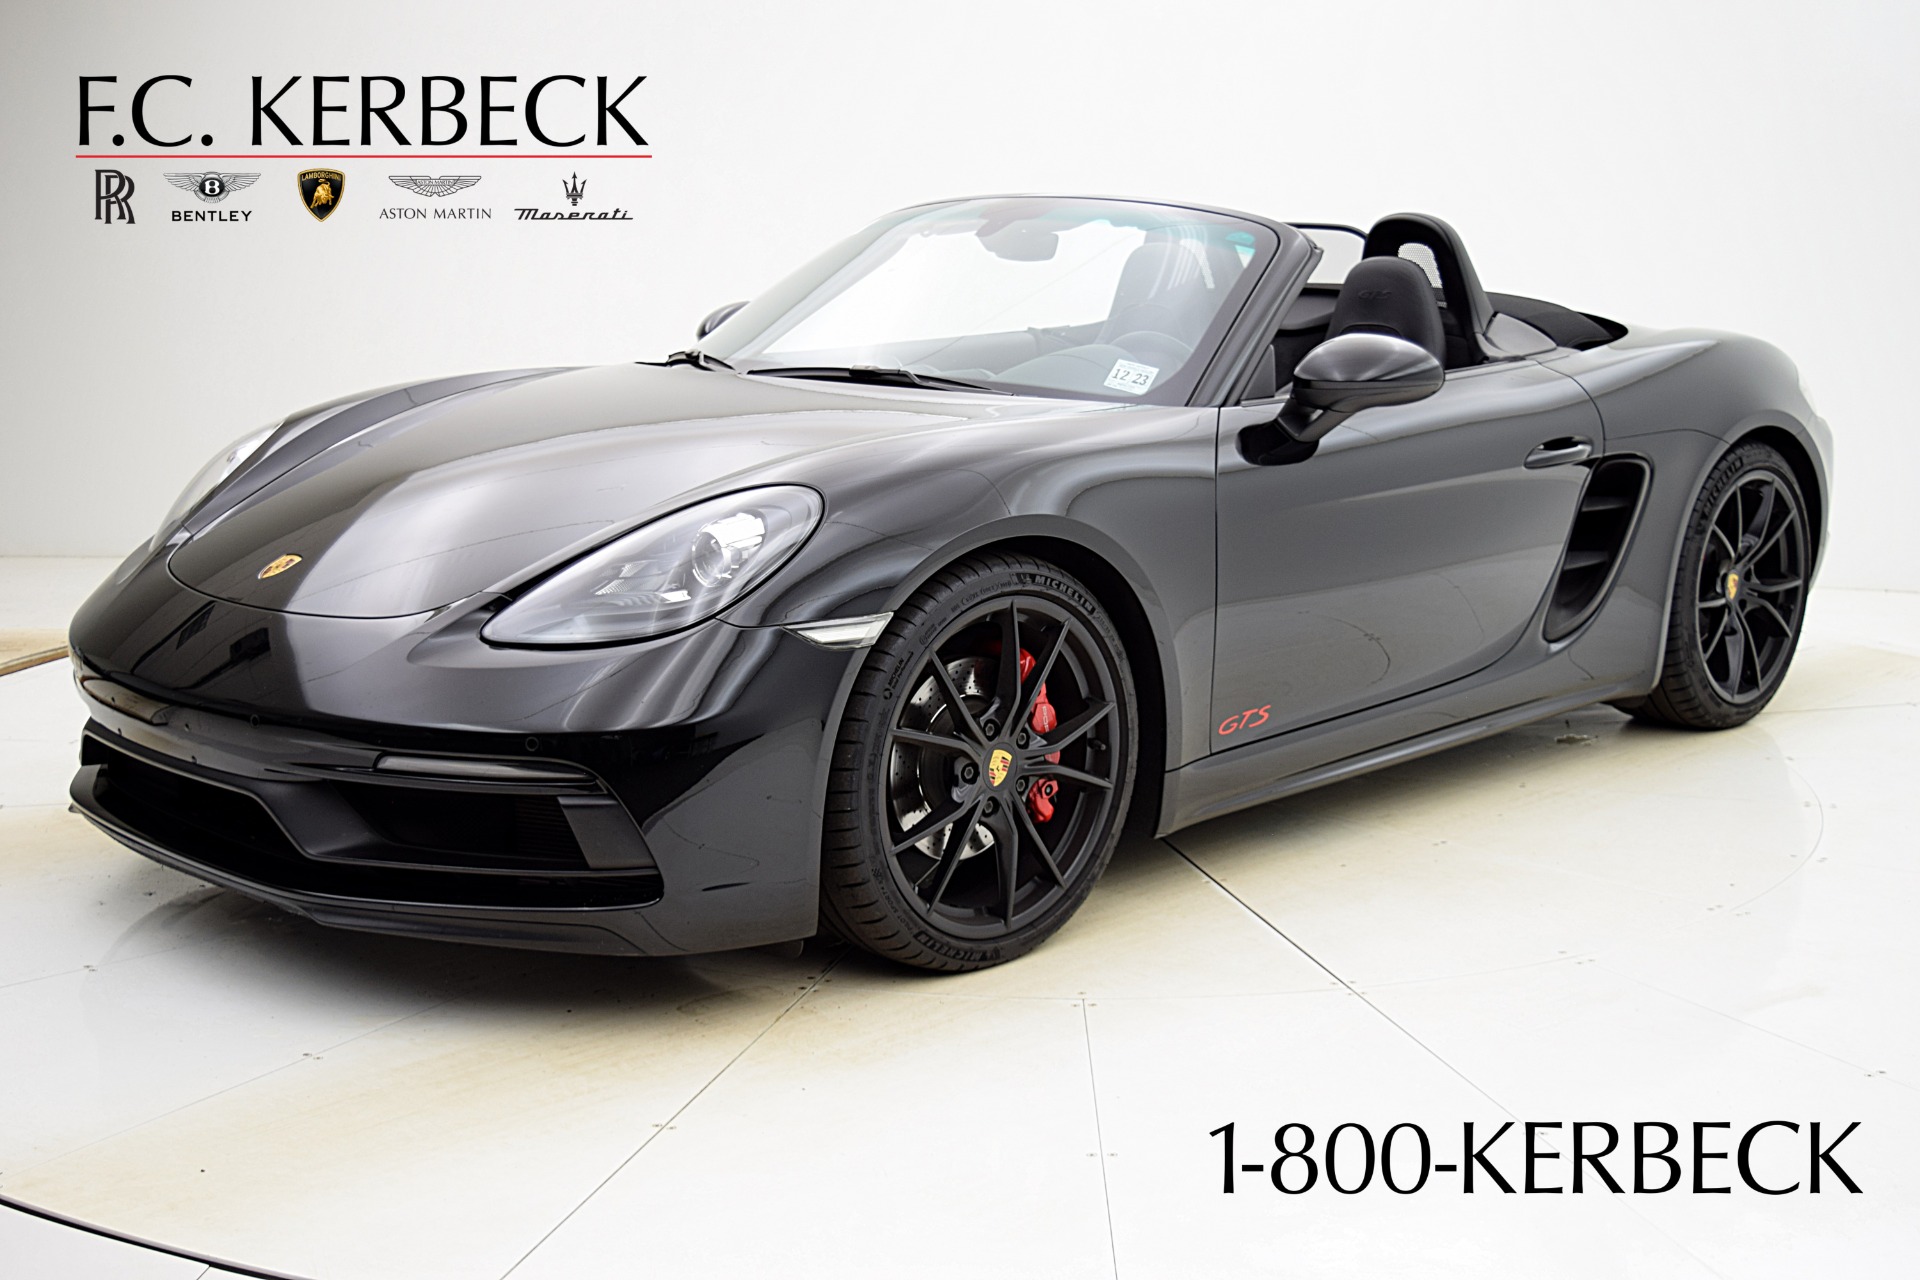 Used 2018 Porsche 718 Boxster GTS Roadster for sale $73,900 at Bentley Palmyra N.J. in Palmyra NJ 08065 2